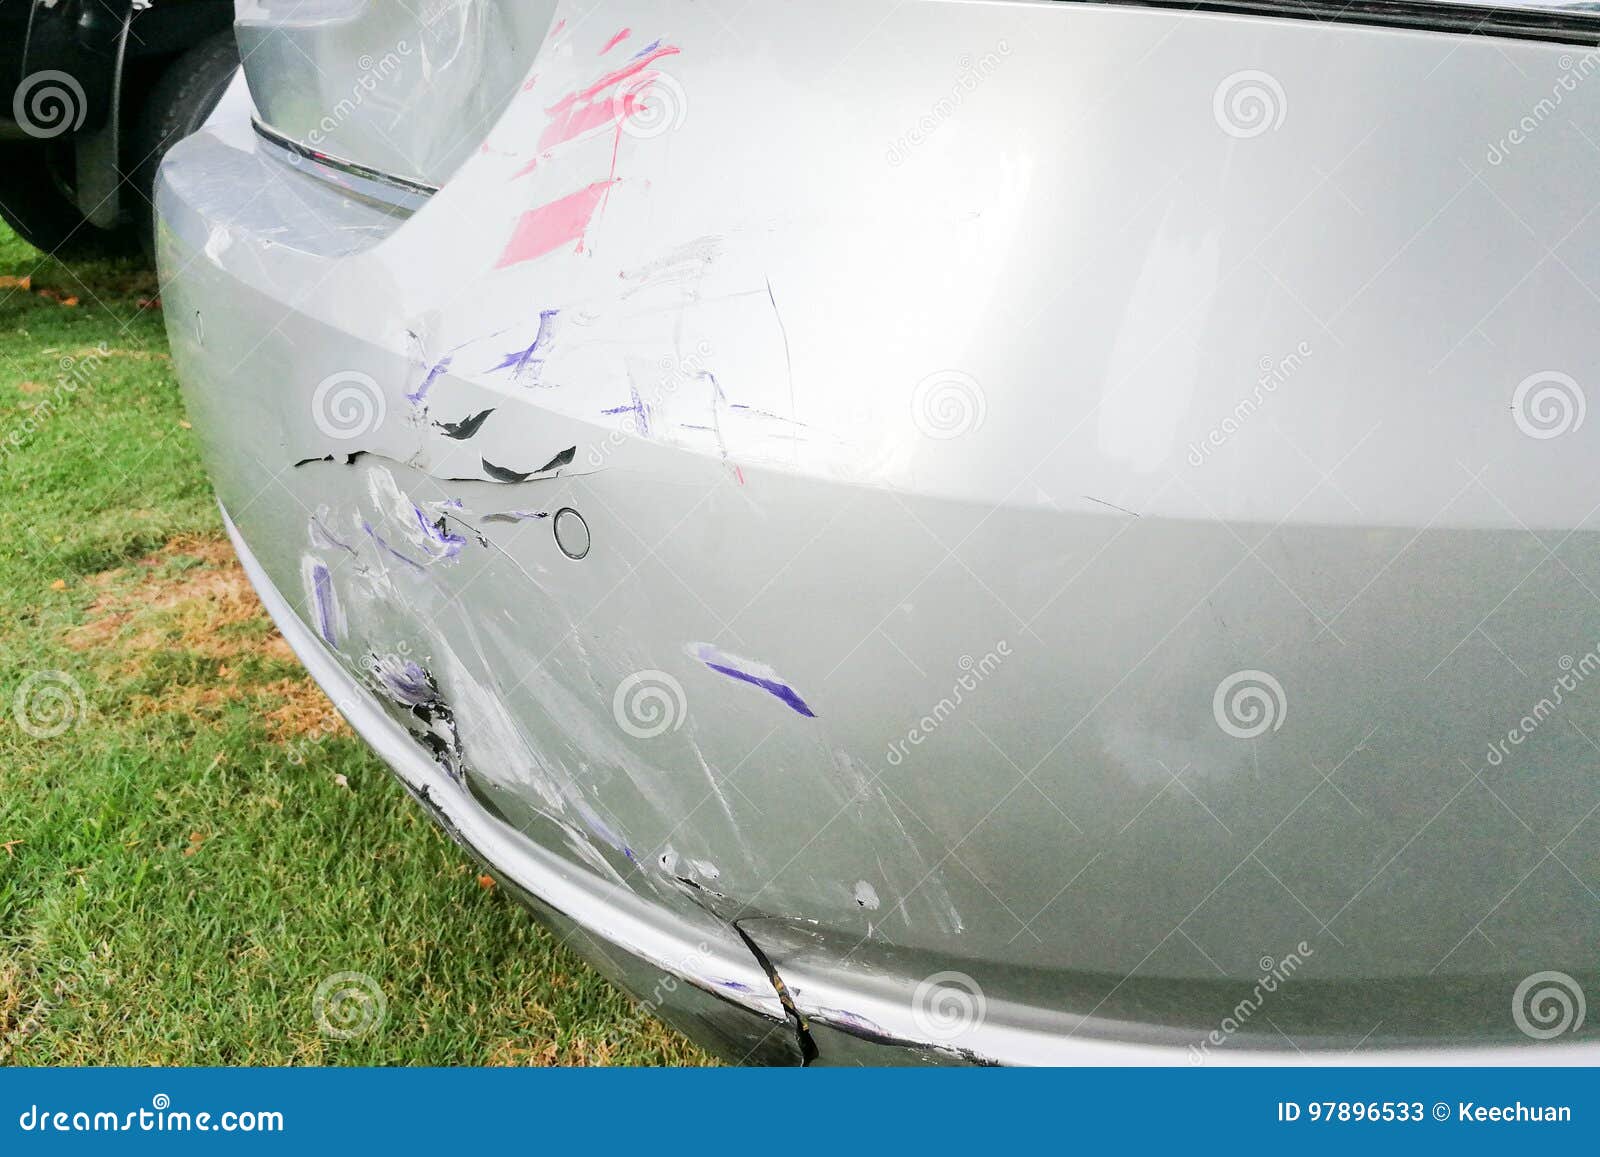 Minor Dent Scratches Bumper Car Involved in Accident Stock Image - Image wreck, road: 97896533